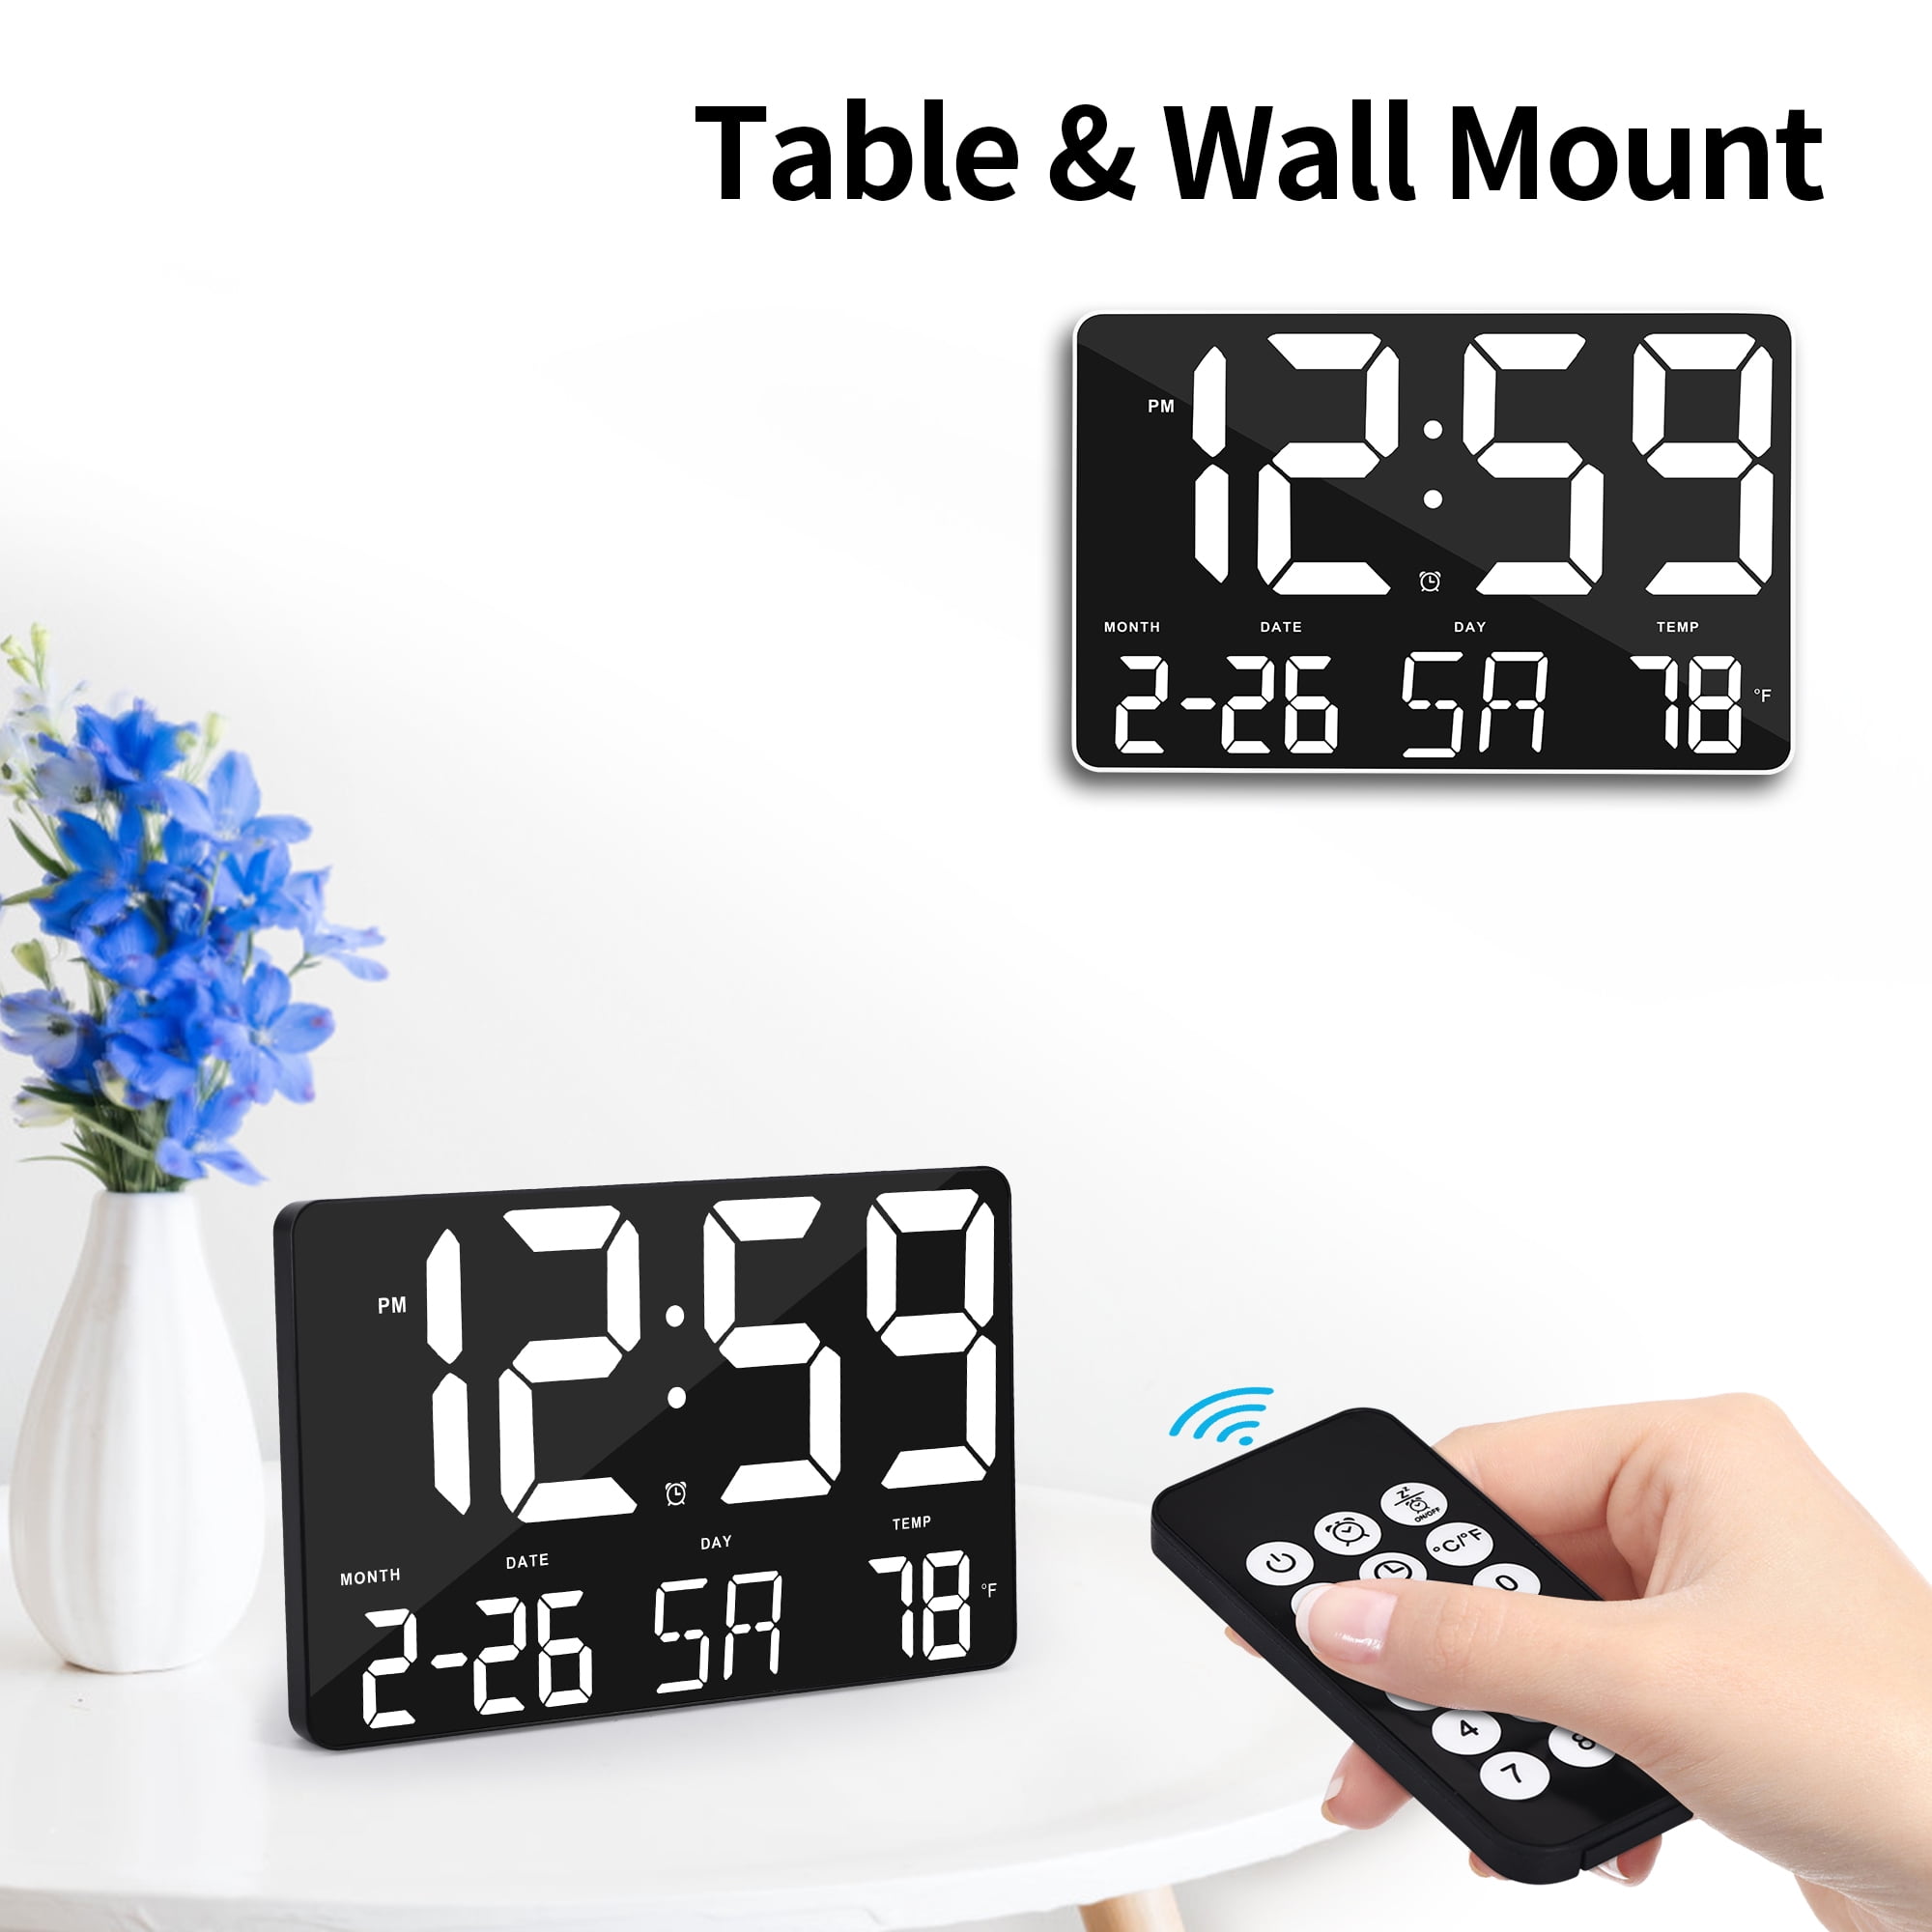 Buy Amgico Digital Wall Clock,11.4 Digital Clock Large Display with Remote  Control,Temperature,Calendar,12/24,Snooze,Adjustable Brightness,LED Large Alarm  Clock for Bedroom,Living Room, Seniors, Elderly Online at Low Prices in  India 